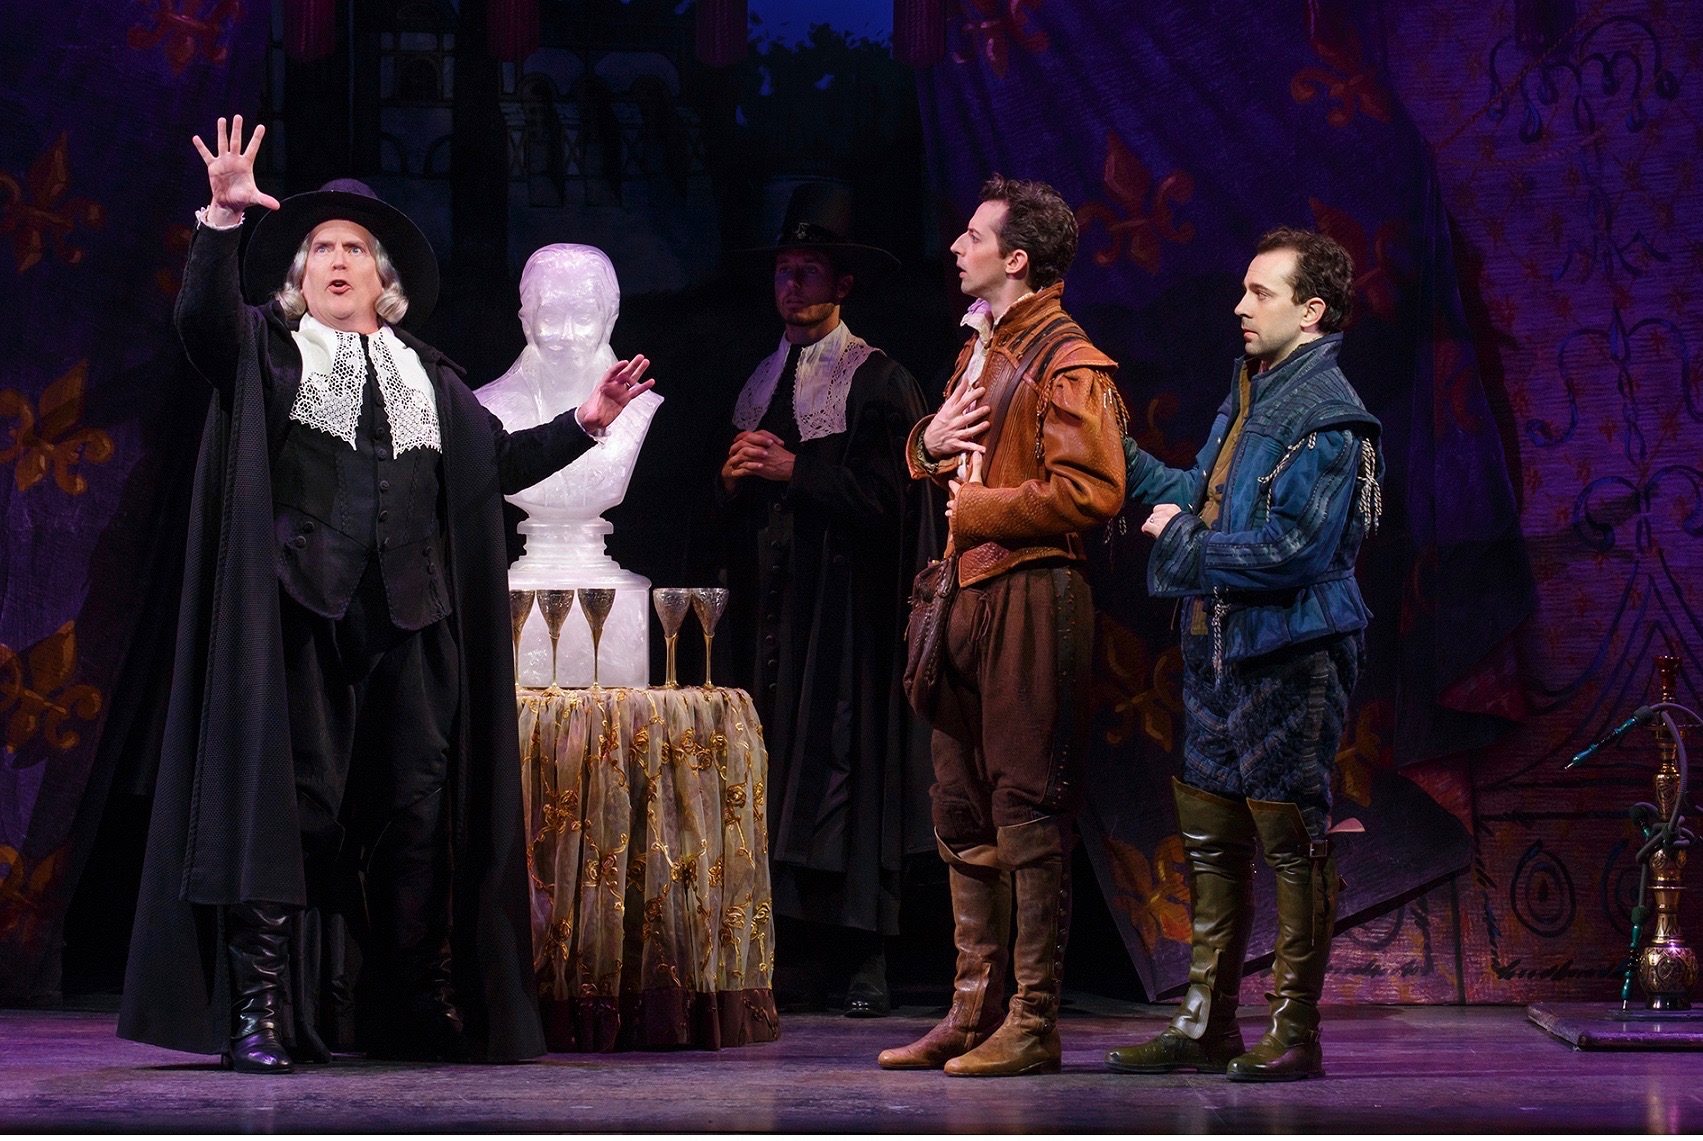 In 'Something Rotten!', Shakespeare's would-be rivals are given mystic foreknowledge of how to write a hit show—but will they proceed to lay an egg?